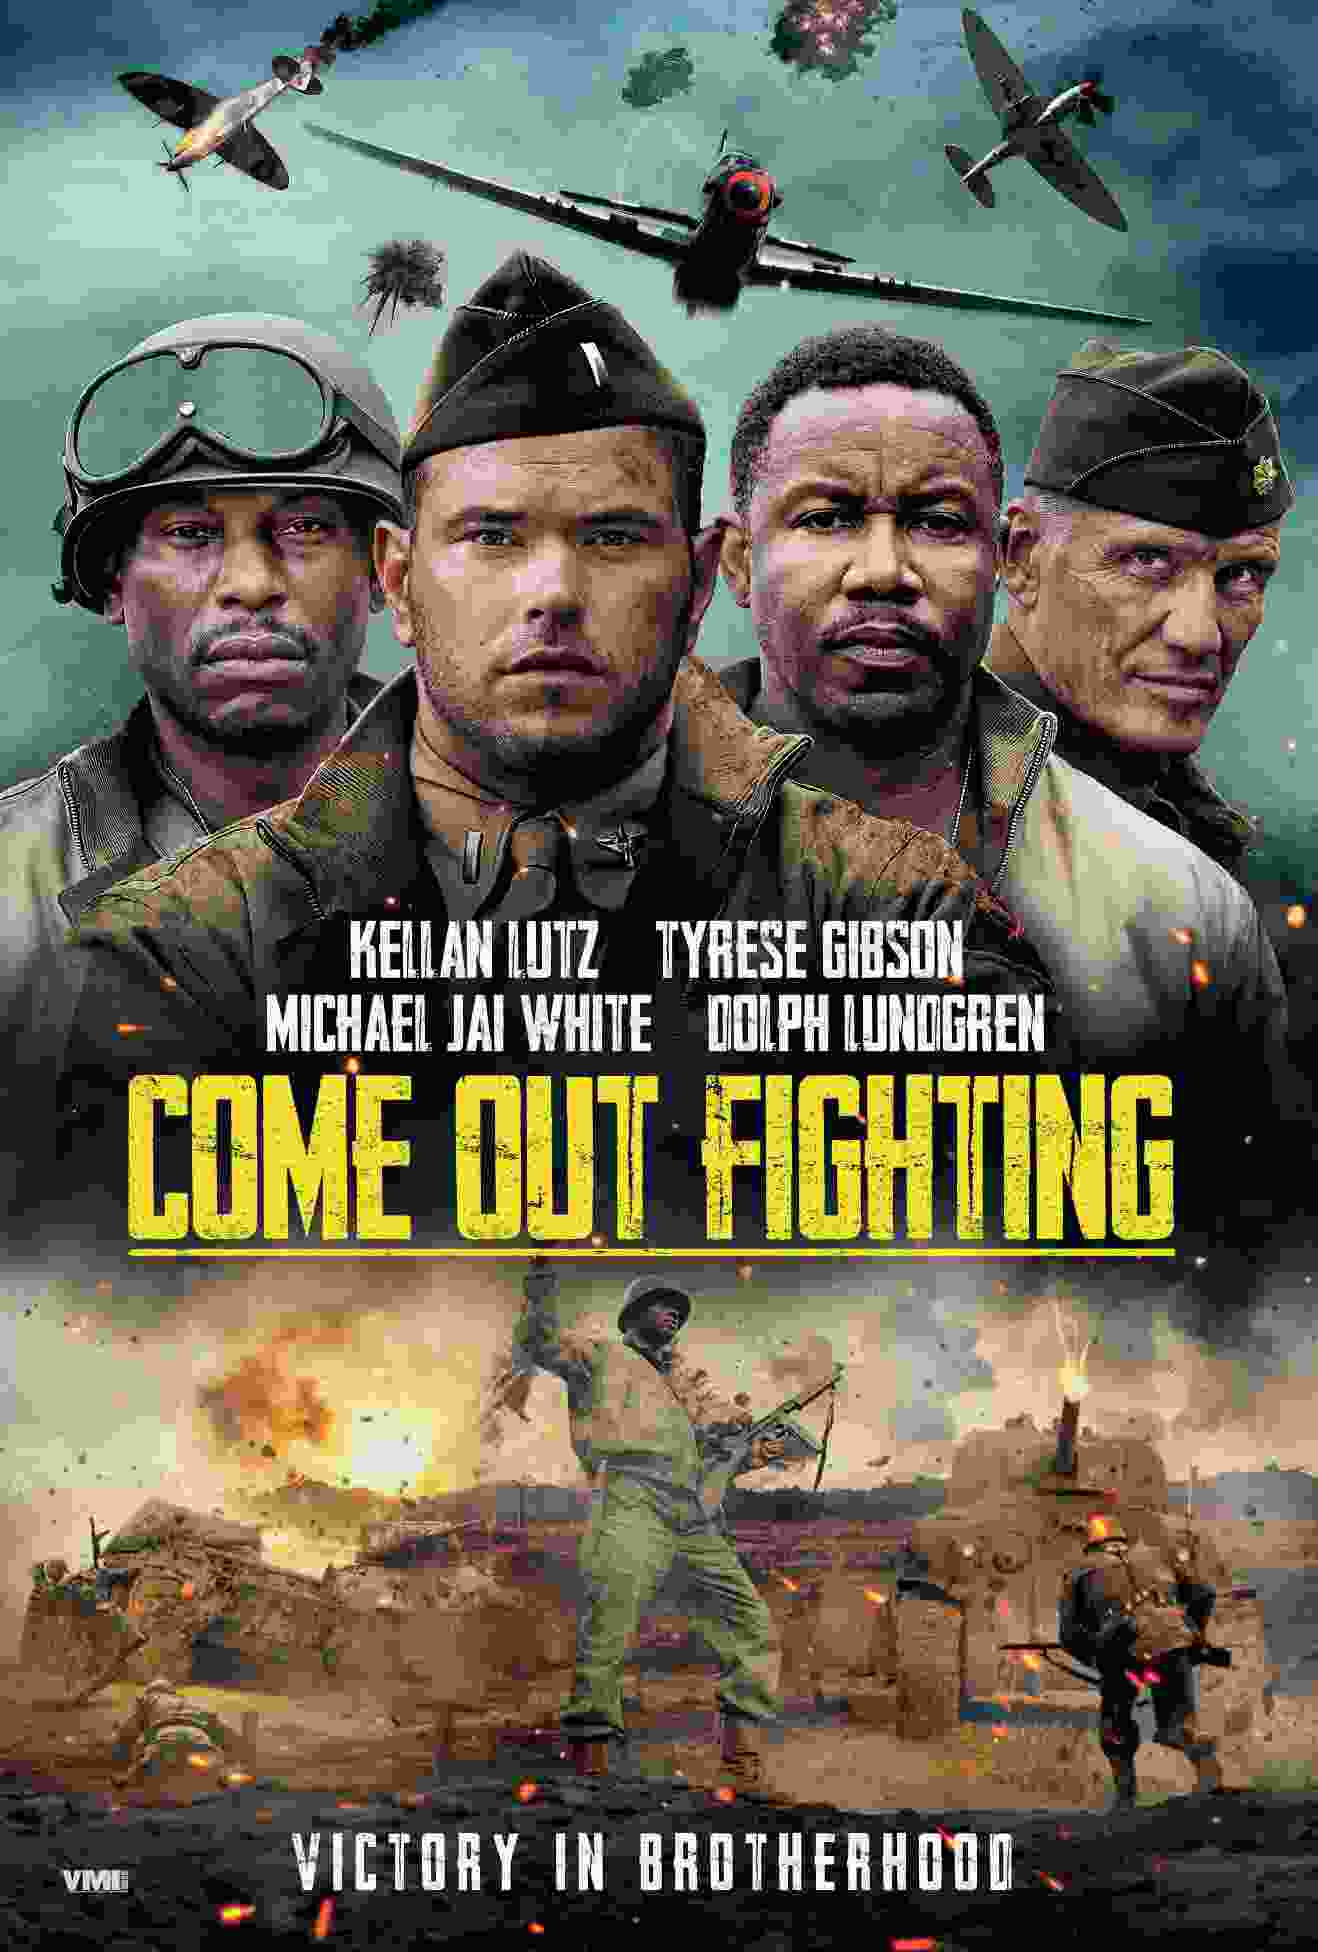 Come Out Fighting (2022) vj Junior Dolph Lundgren